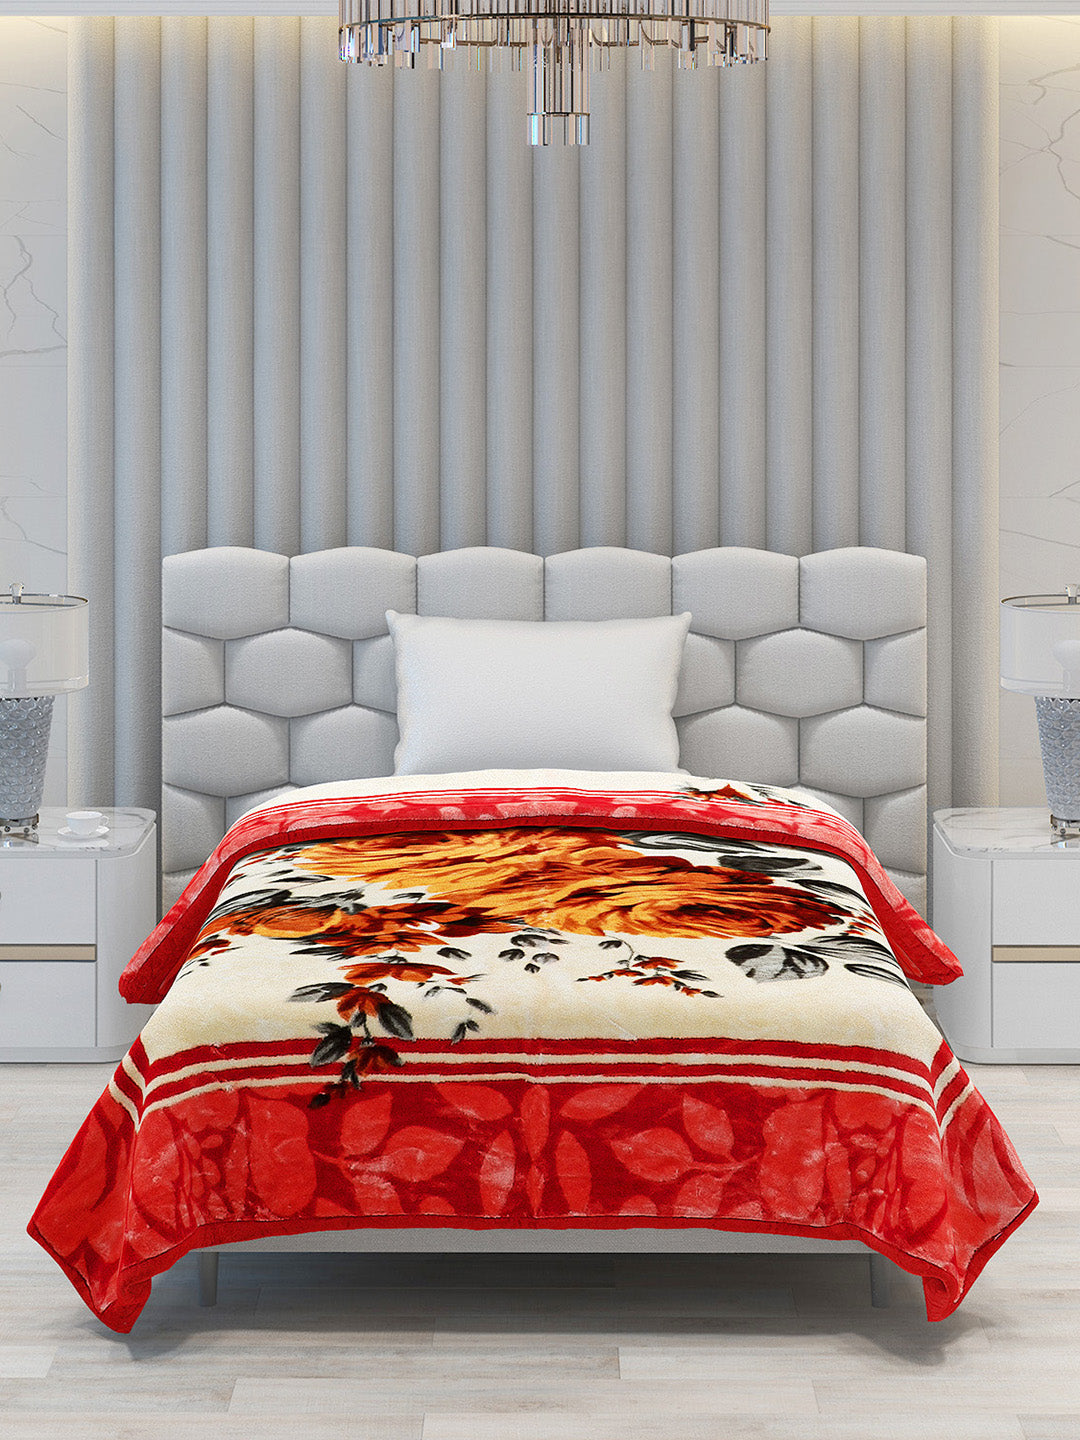 Printed Single Bed Blanket for Heavy Winter -1 Ply